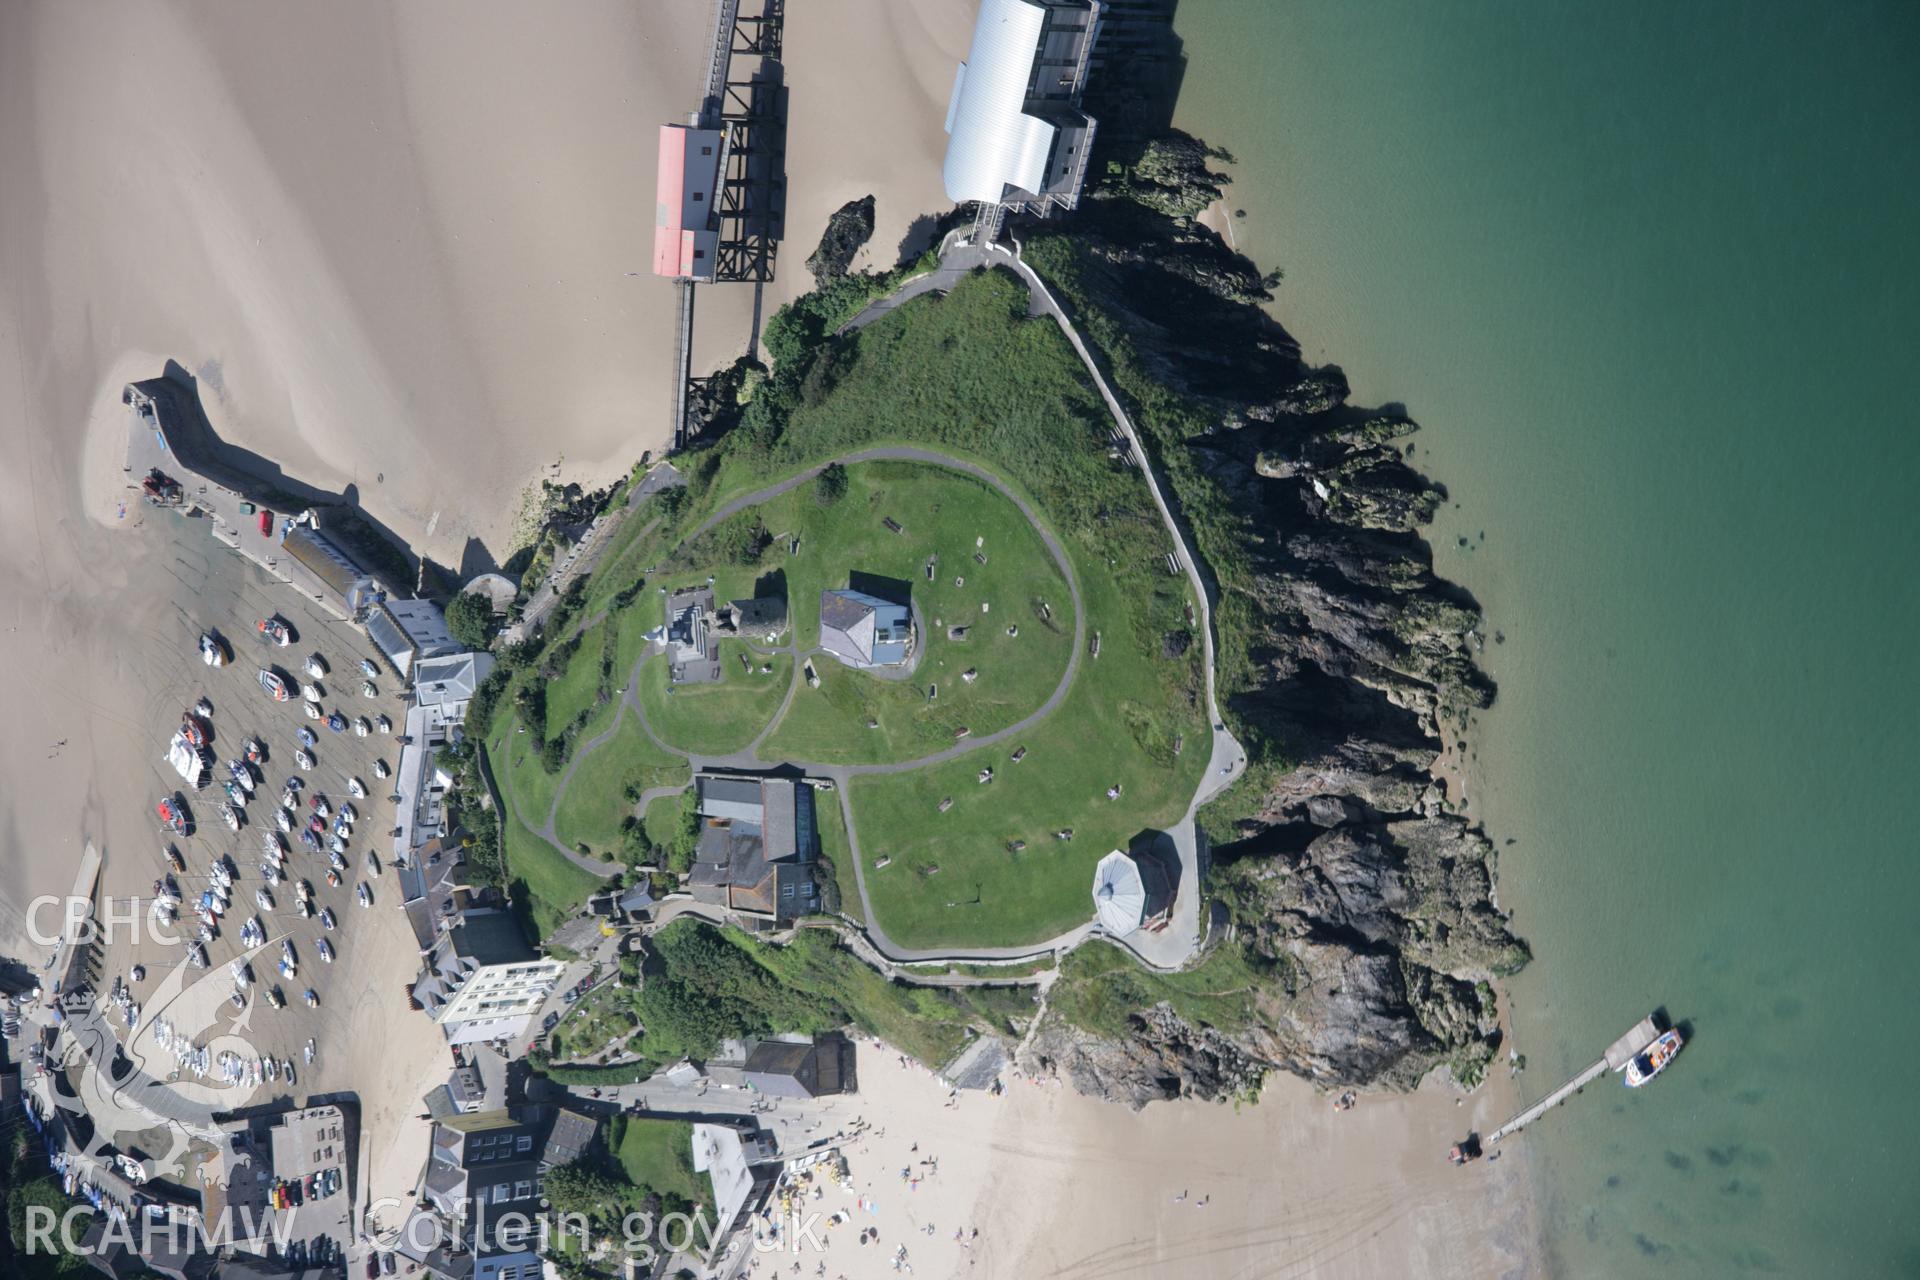 RCAHMW colour oblique aerial photograph of Tenby Castle from the east. Taken on 22 June 2005 by Toby Driver